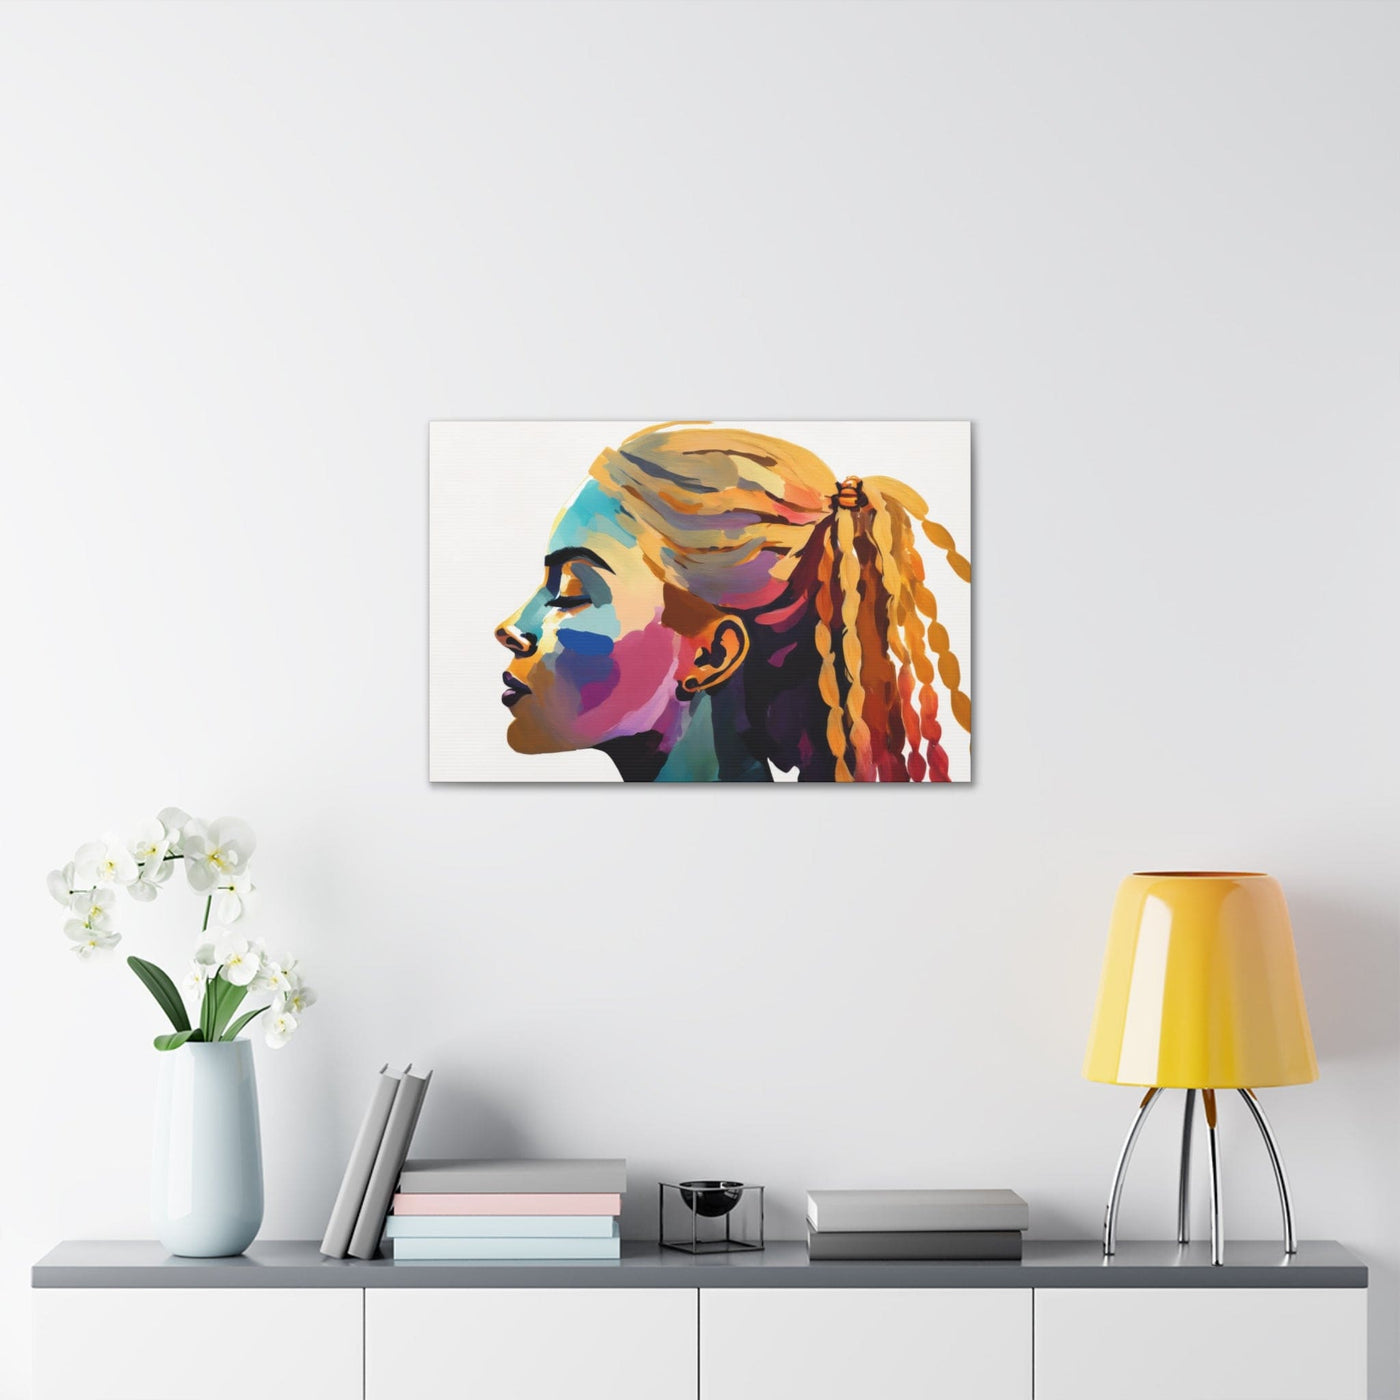 Wall Art Decor Canvas Print Artwork My Colors Are Beautiful - Canvas